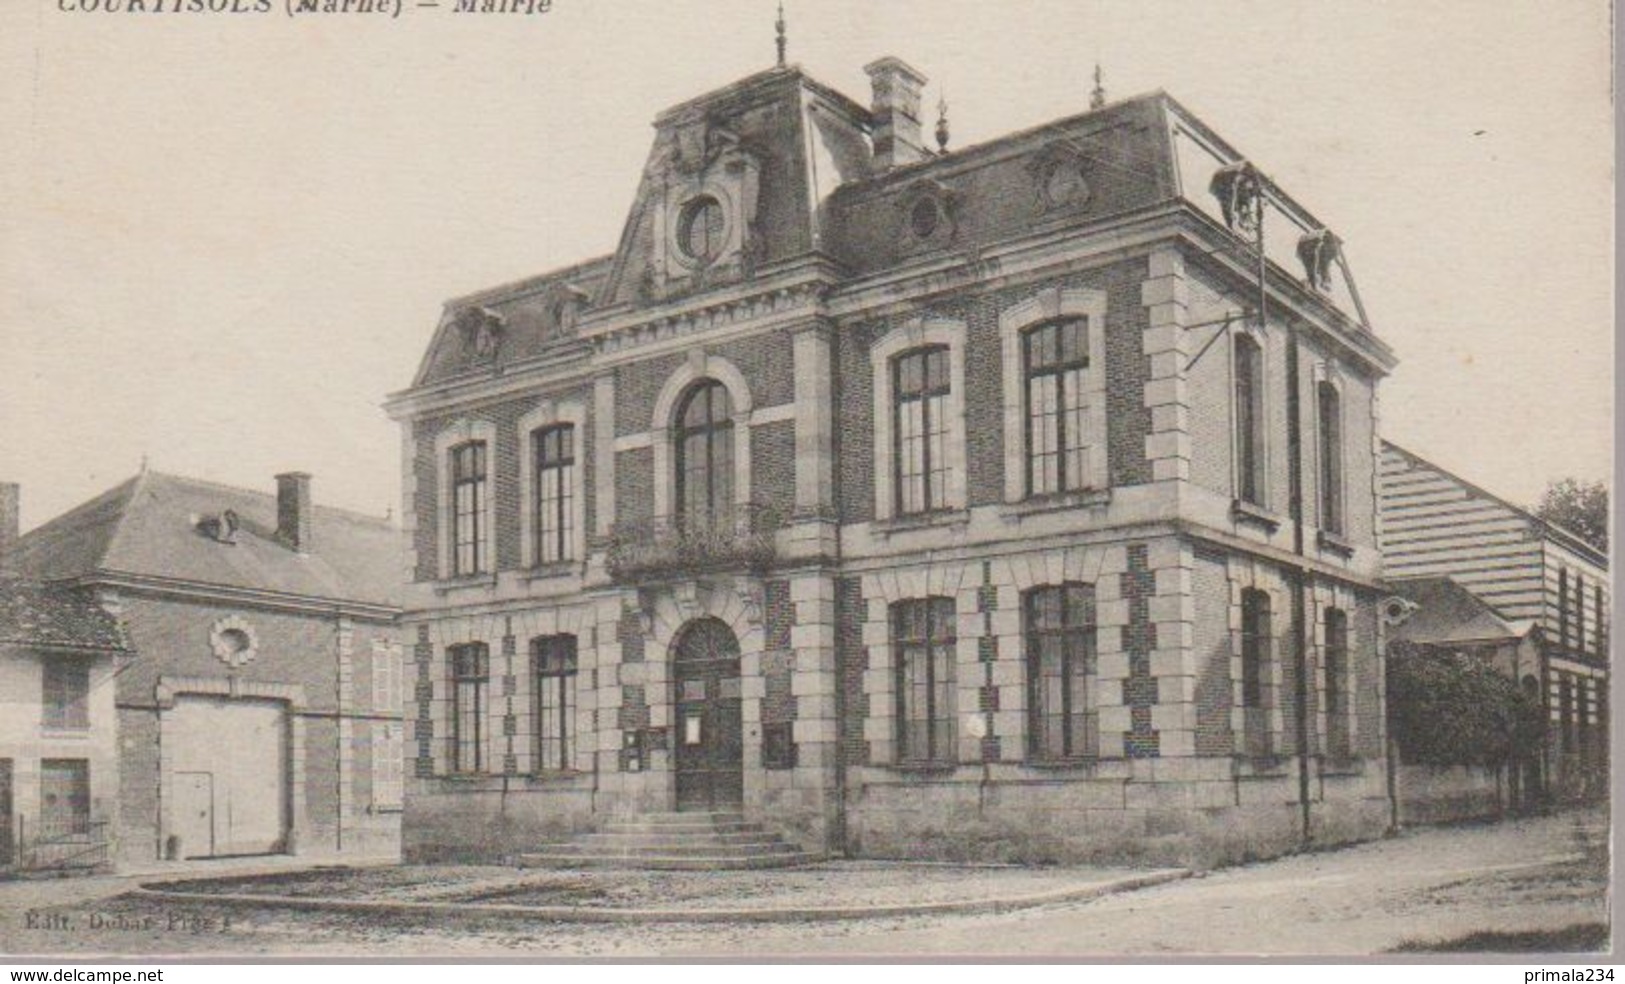 COURTISOLS - MAIRIE - Courtisols